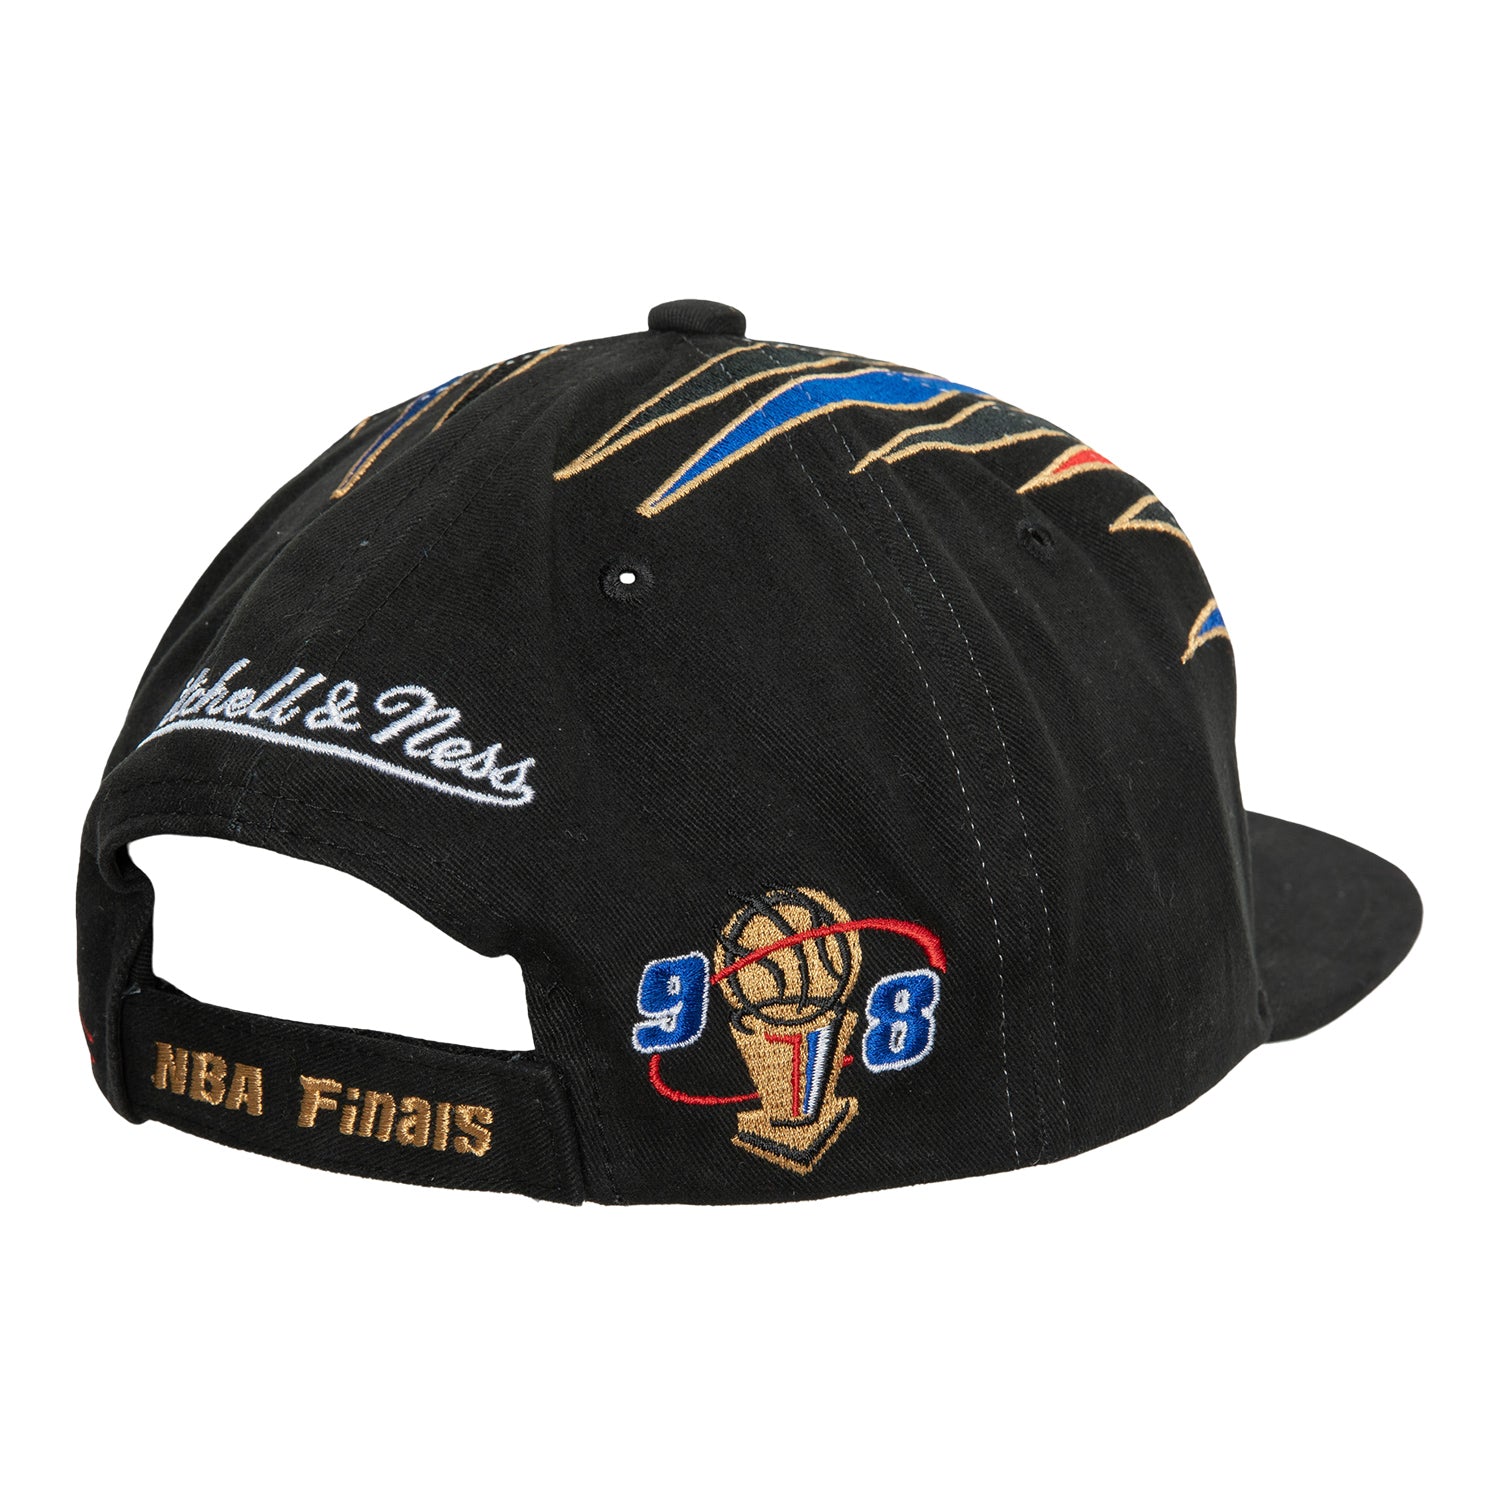 Chicago Bulls '98 Champs M&N Snapback in black - back view